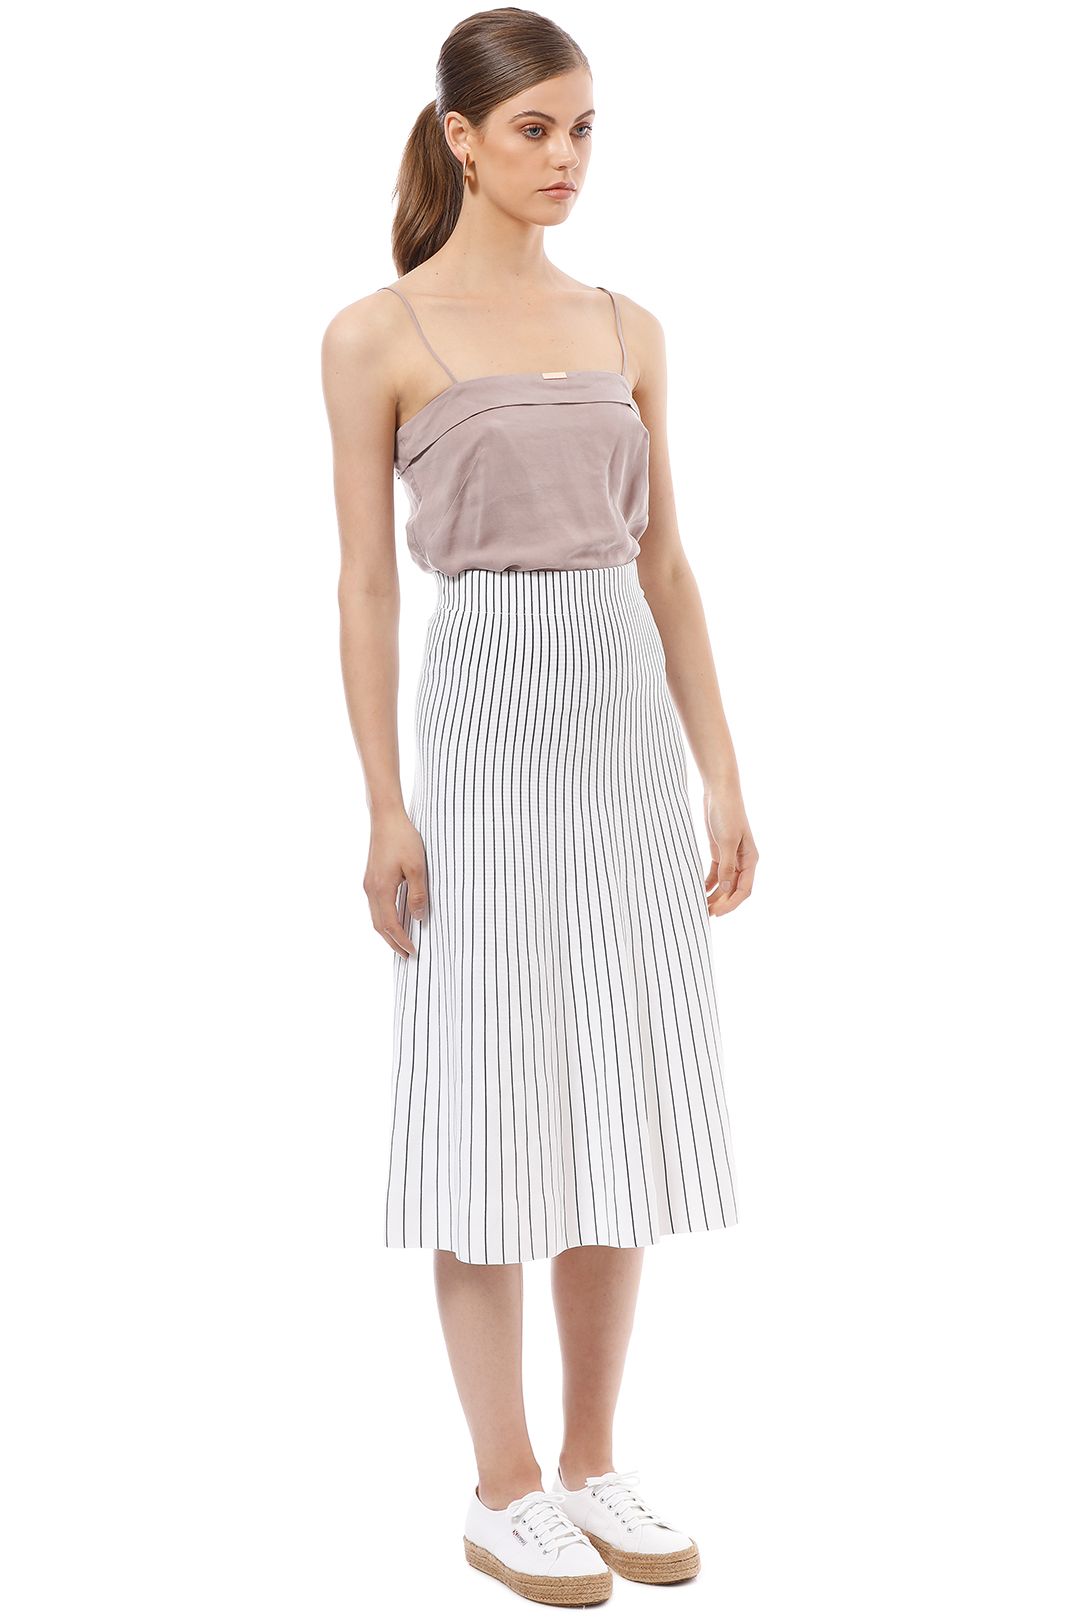 Elka Collective - Ruby Skirt - White Stripe - Side